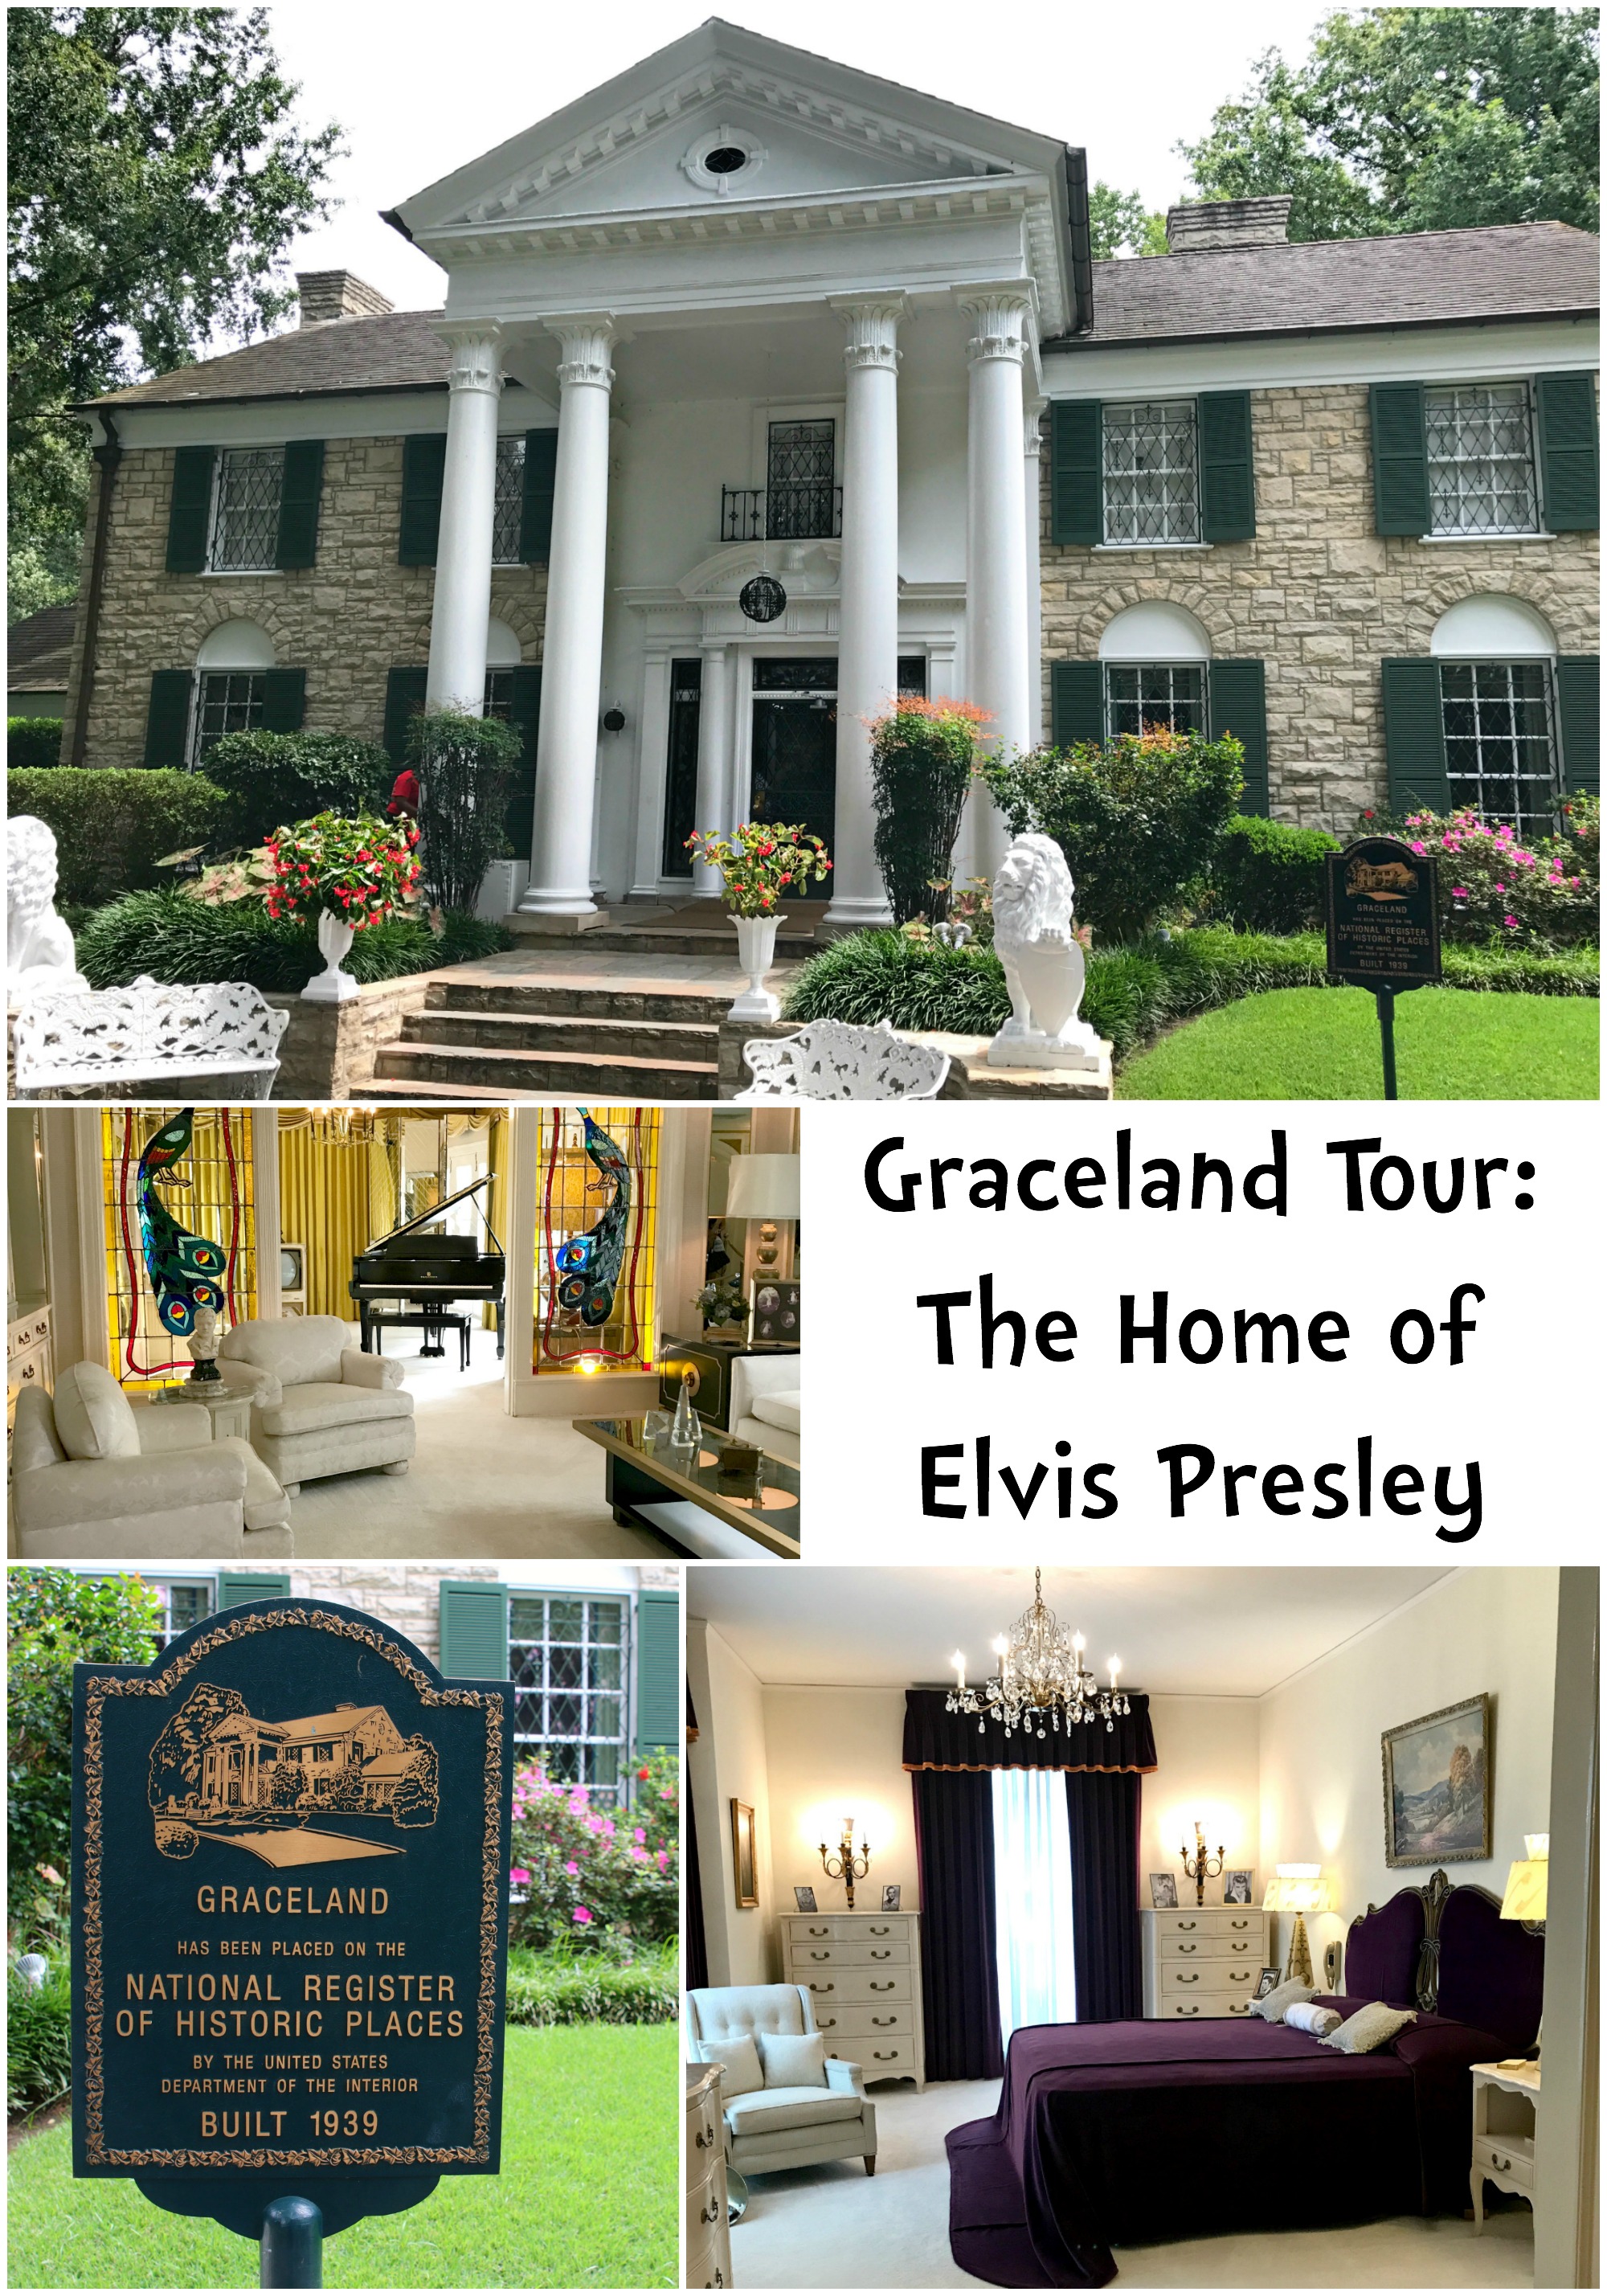 Tour Graceland Home of Elvis Presley Oh, the Places We Travel!